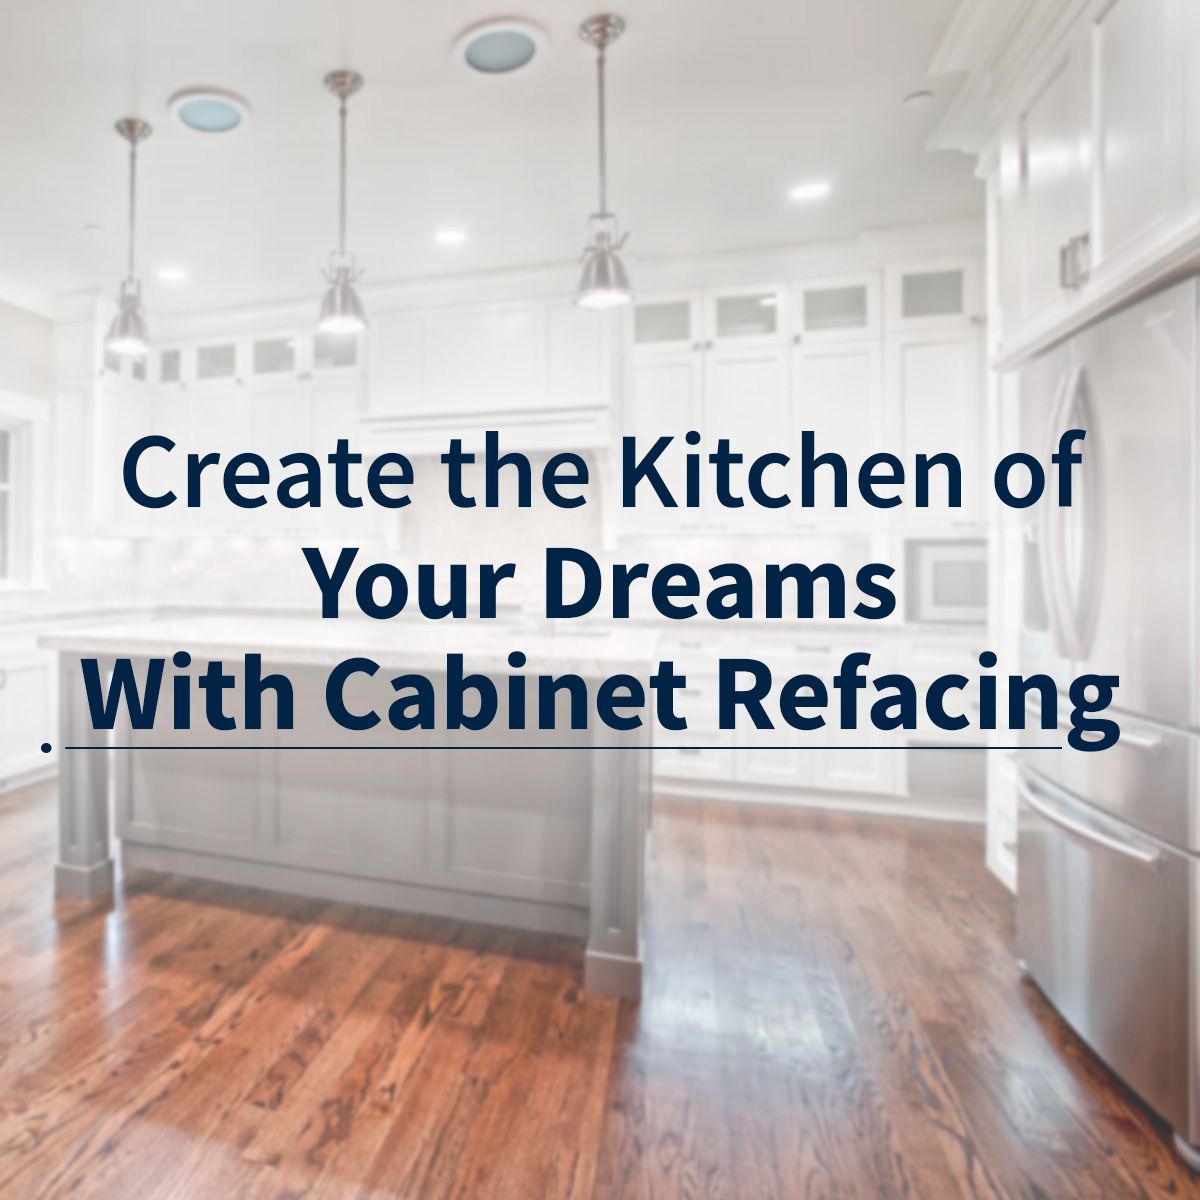 Create the Kitchen of Your Dreams With Cabinet Refacing